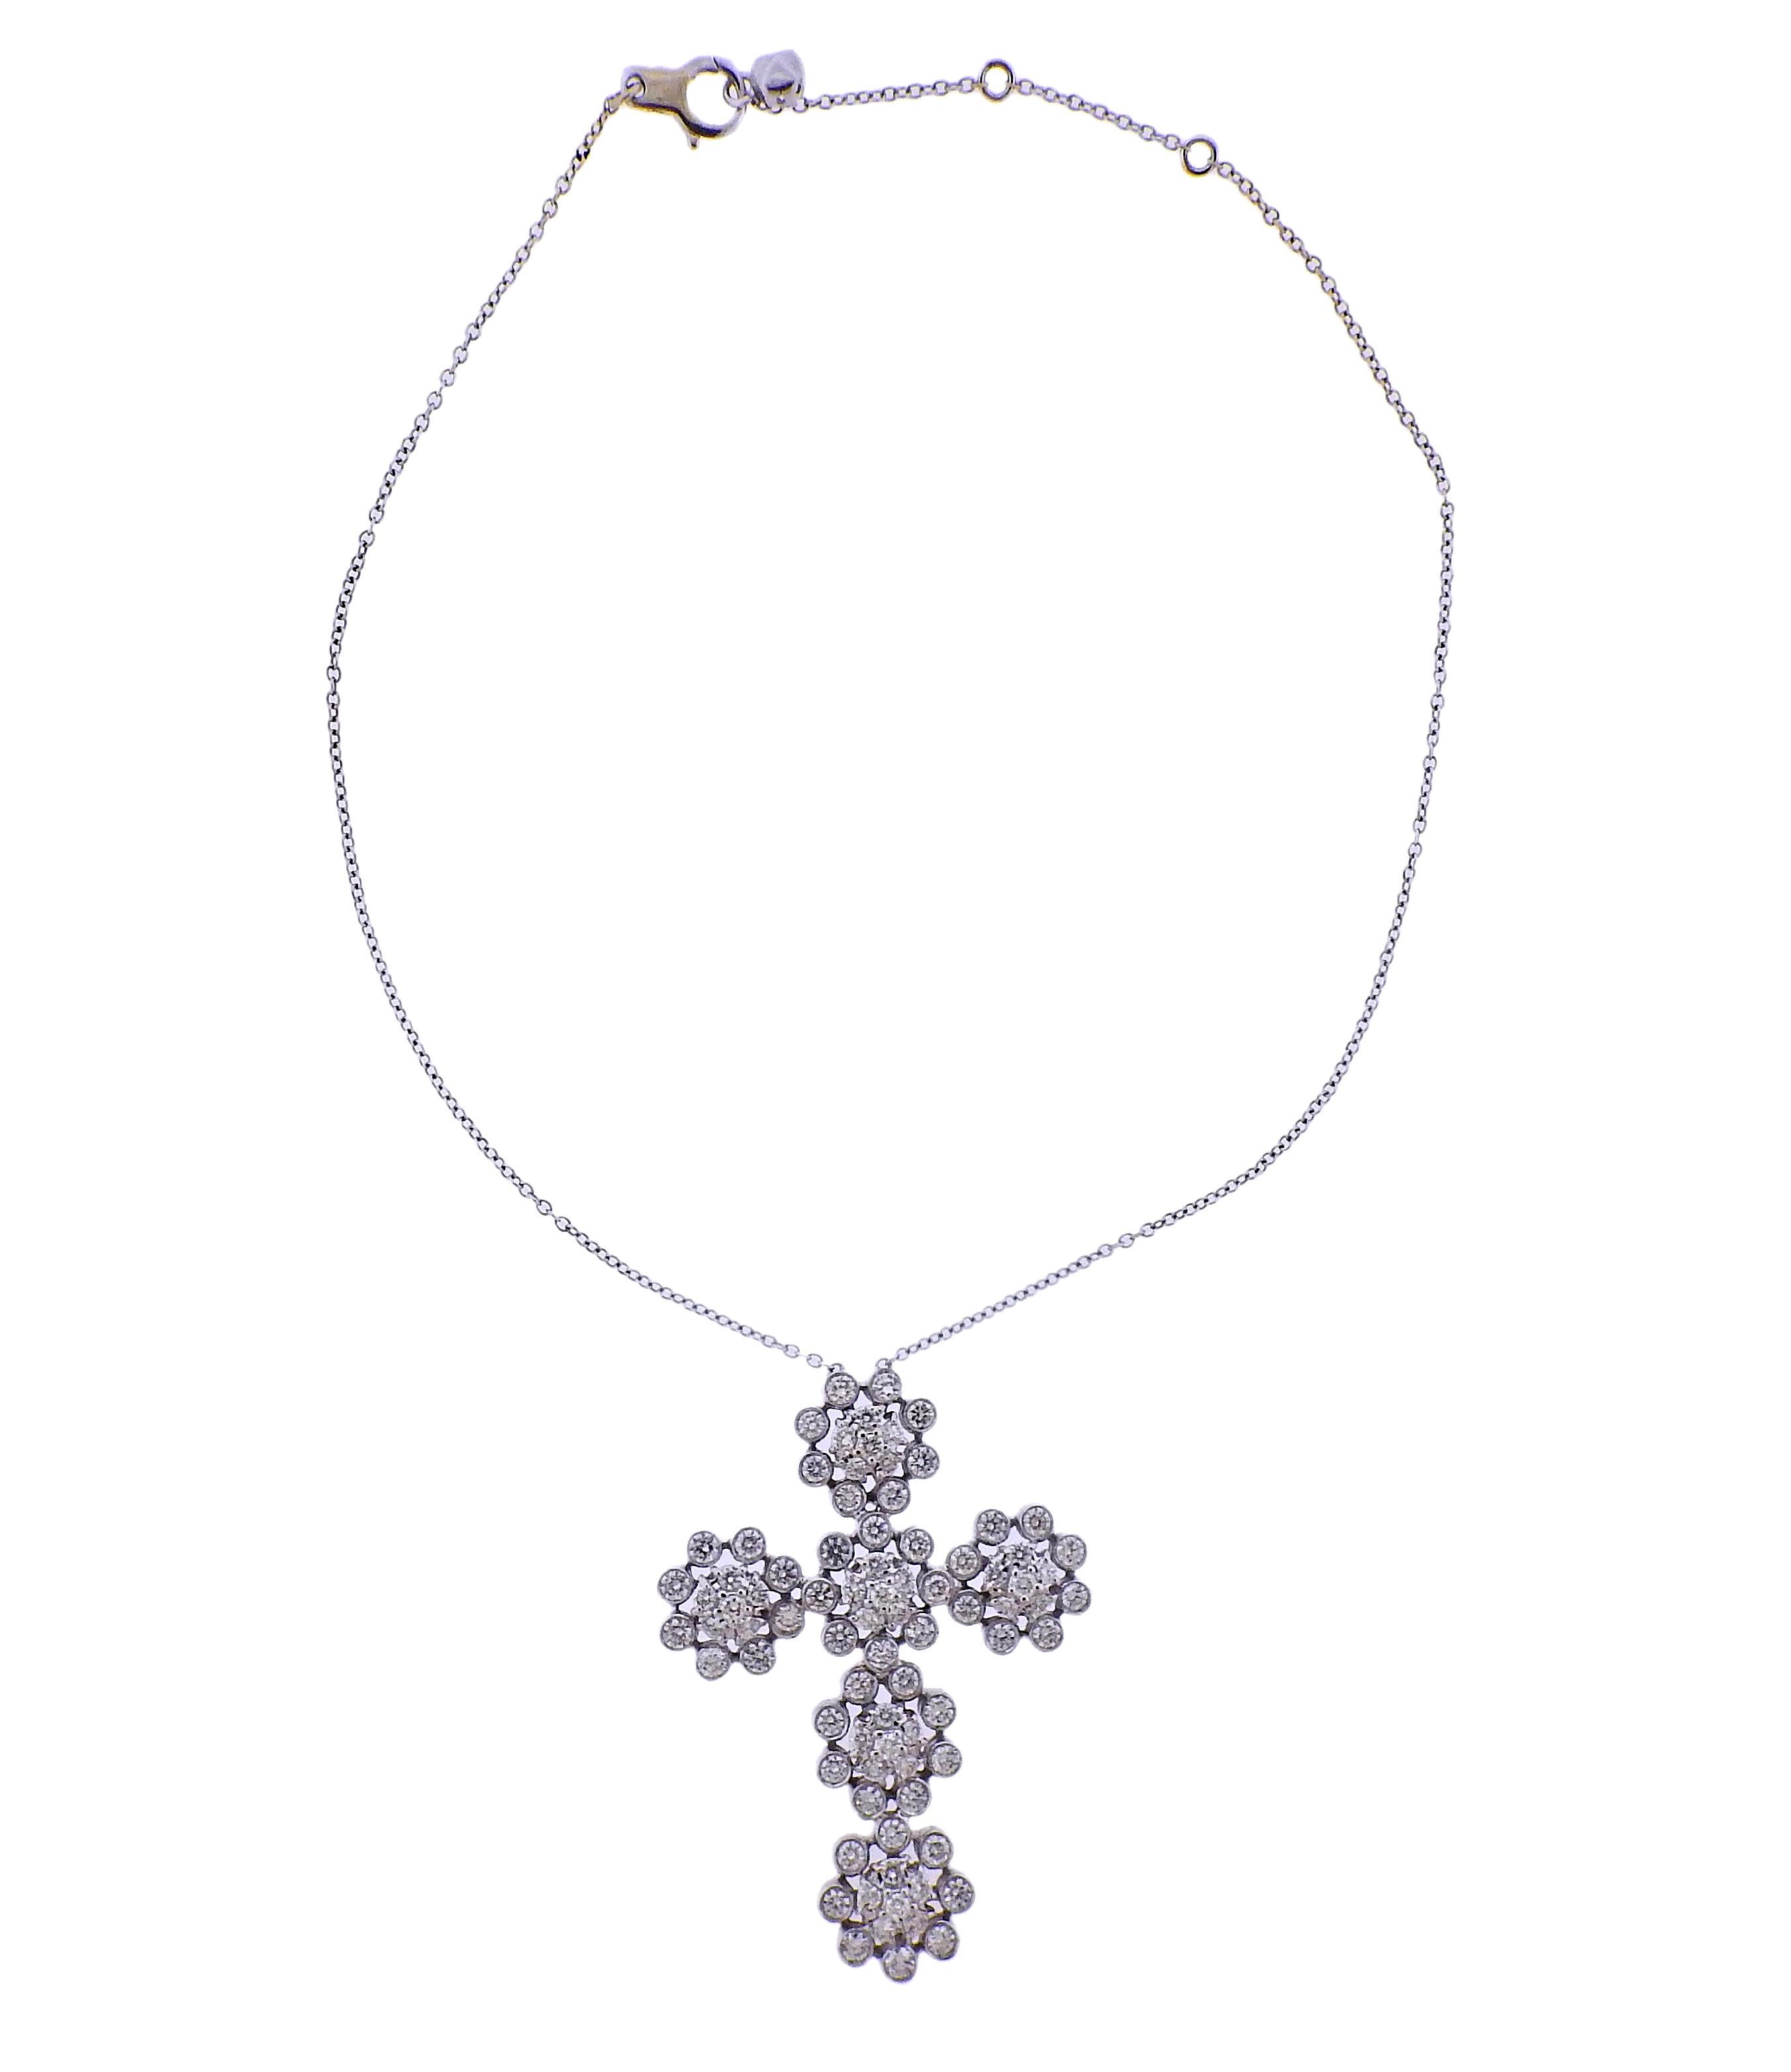 Impressive 18k white gold cross pendant on a chain necklace. Set with approx. 8 carats in diamonds. Necklace is 16.5